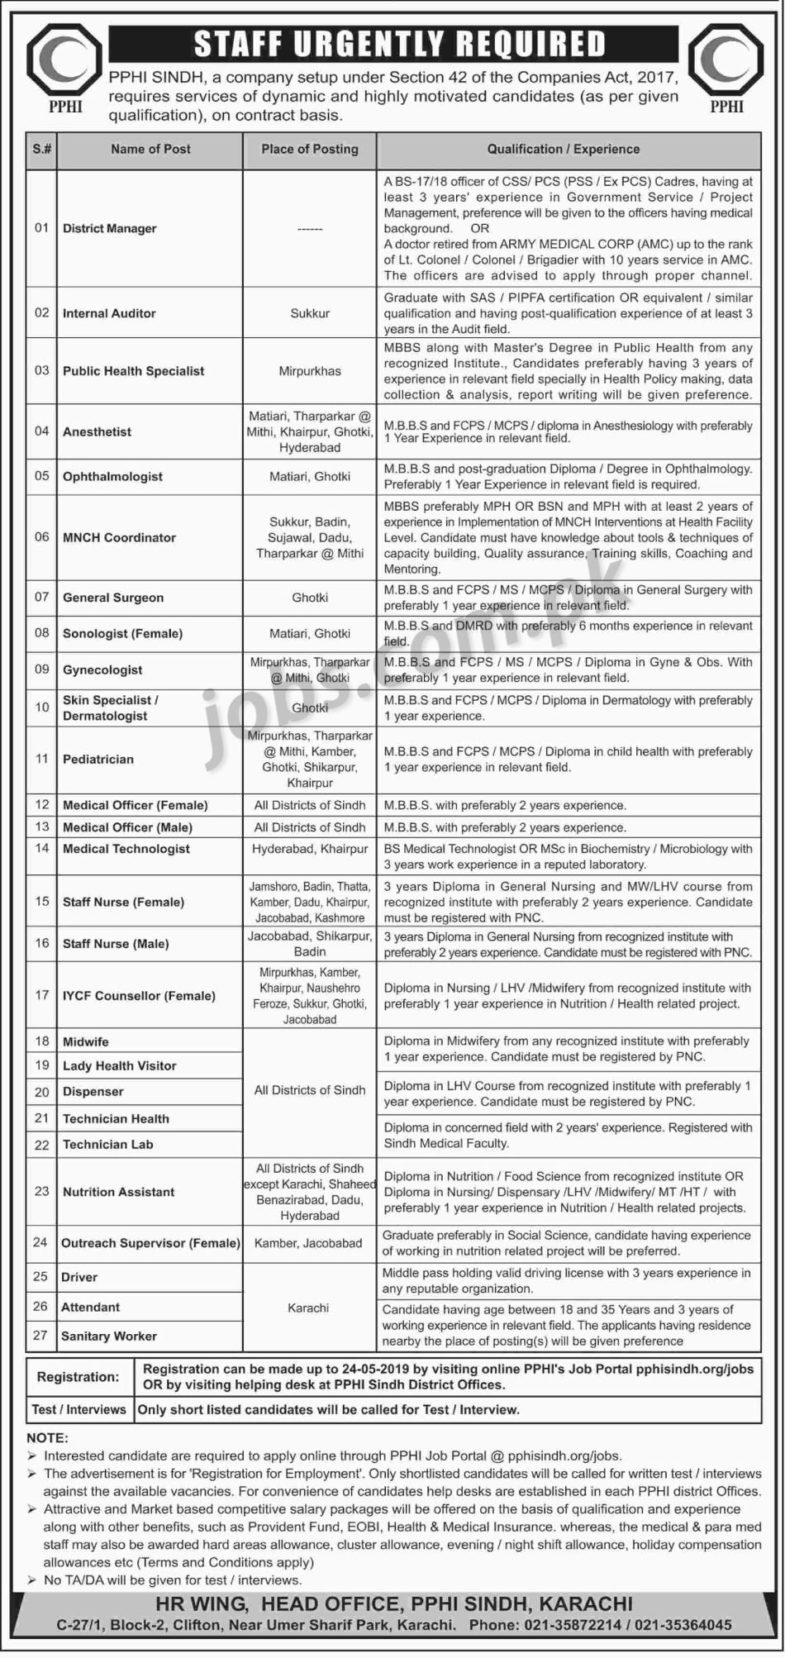 PPHI Jobs 2019 for 100+ Medical, Paramedical, Administrative & Support Staff (Sindh Districts)